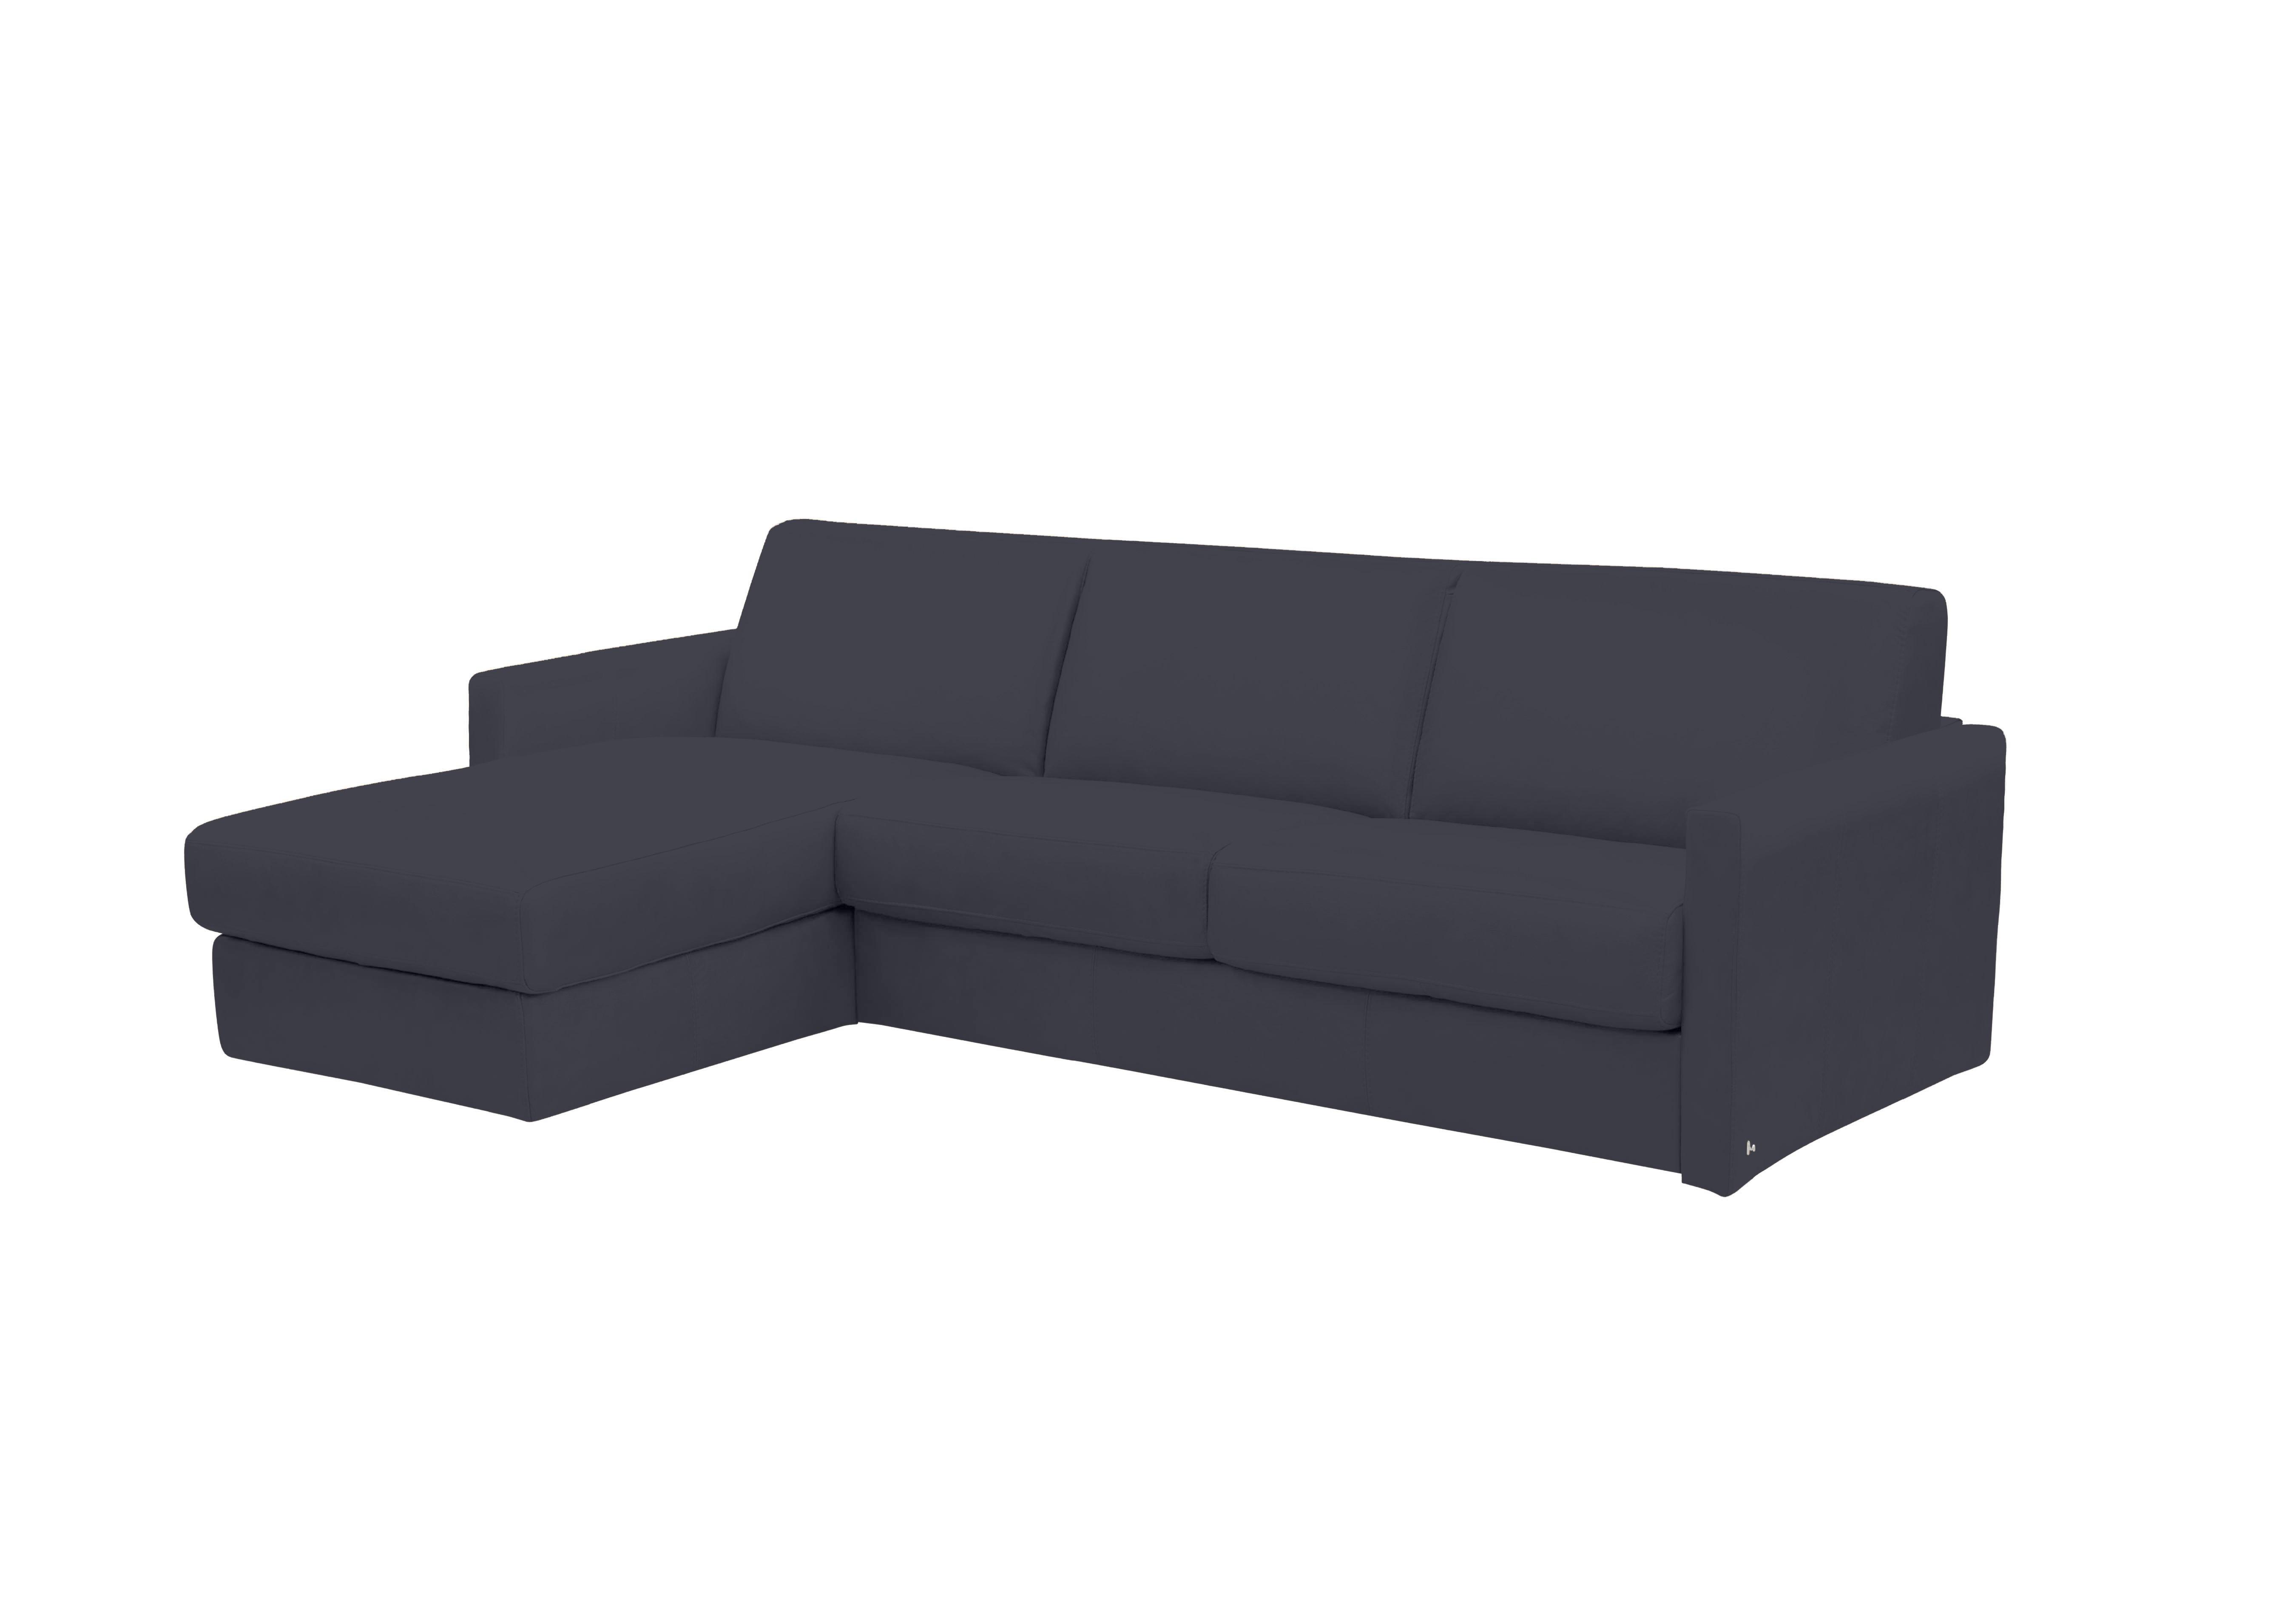 Alcova 3 Seater Leather Sofa Bed with Storage Chaise and Slim Arms in Torello Blu 81 on Furniture Village